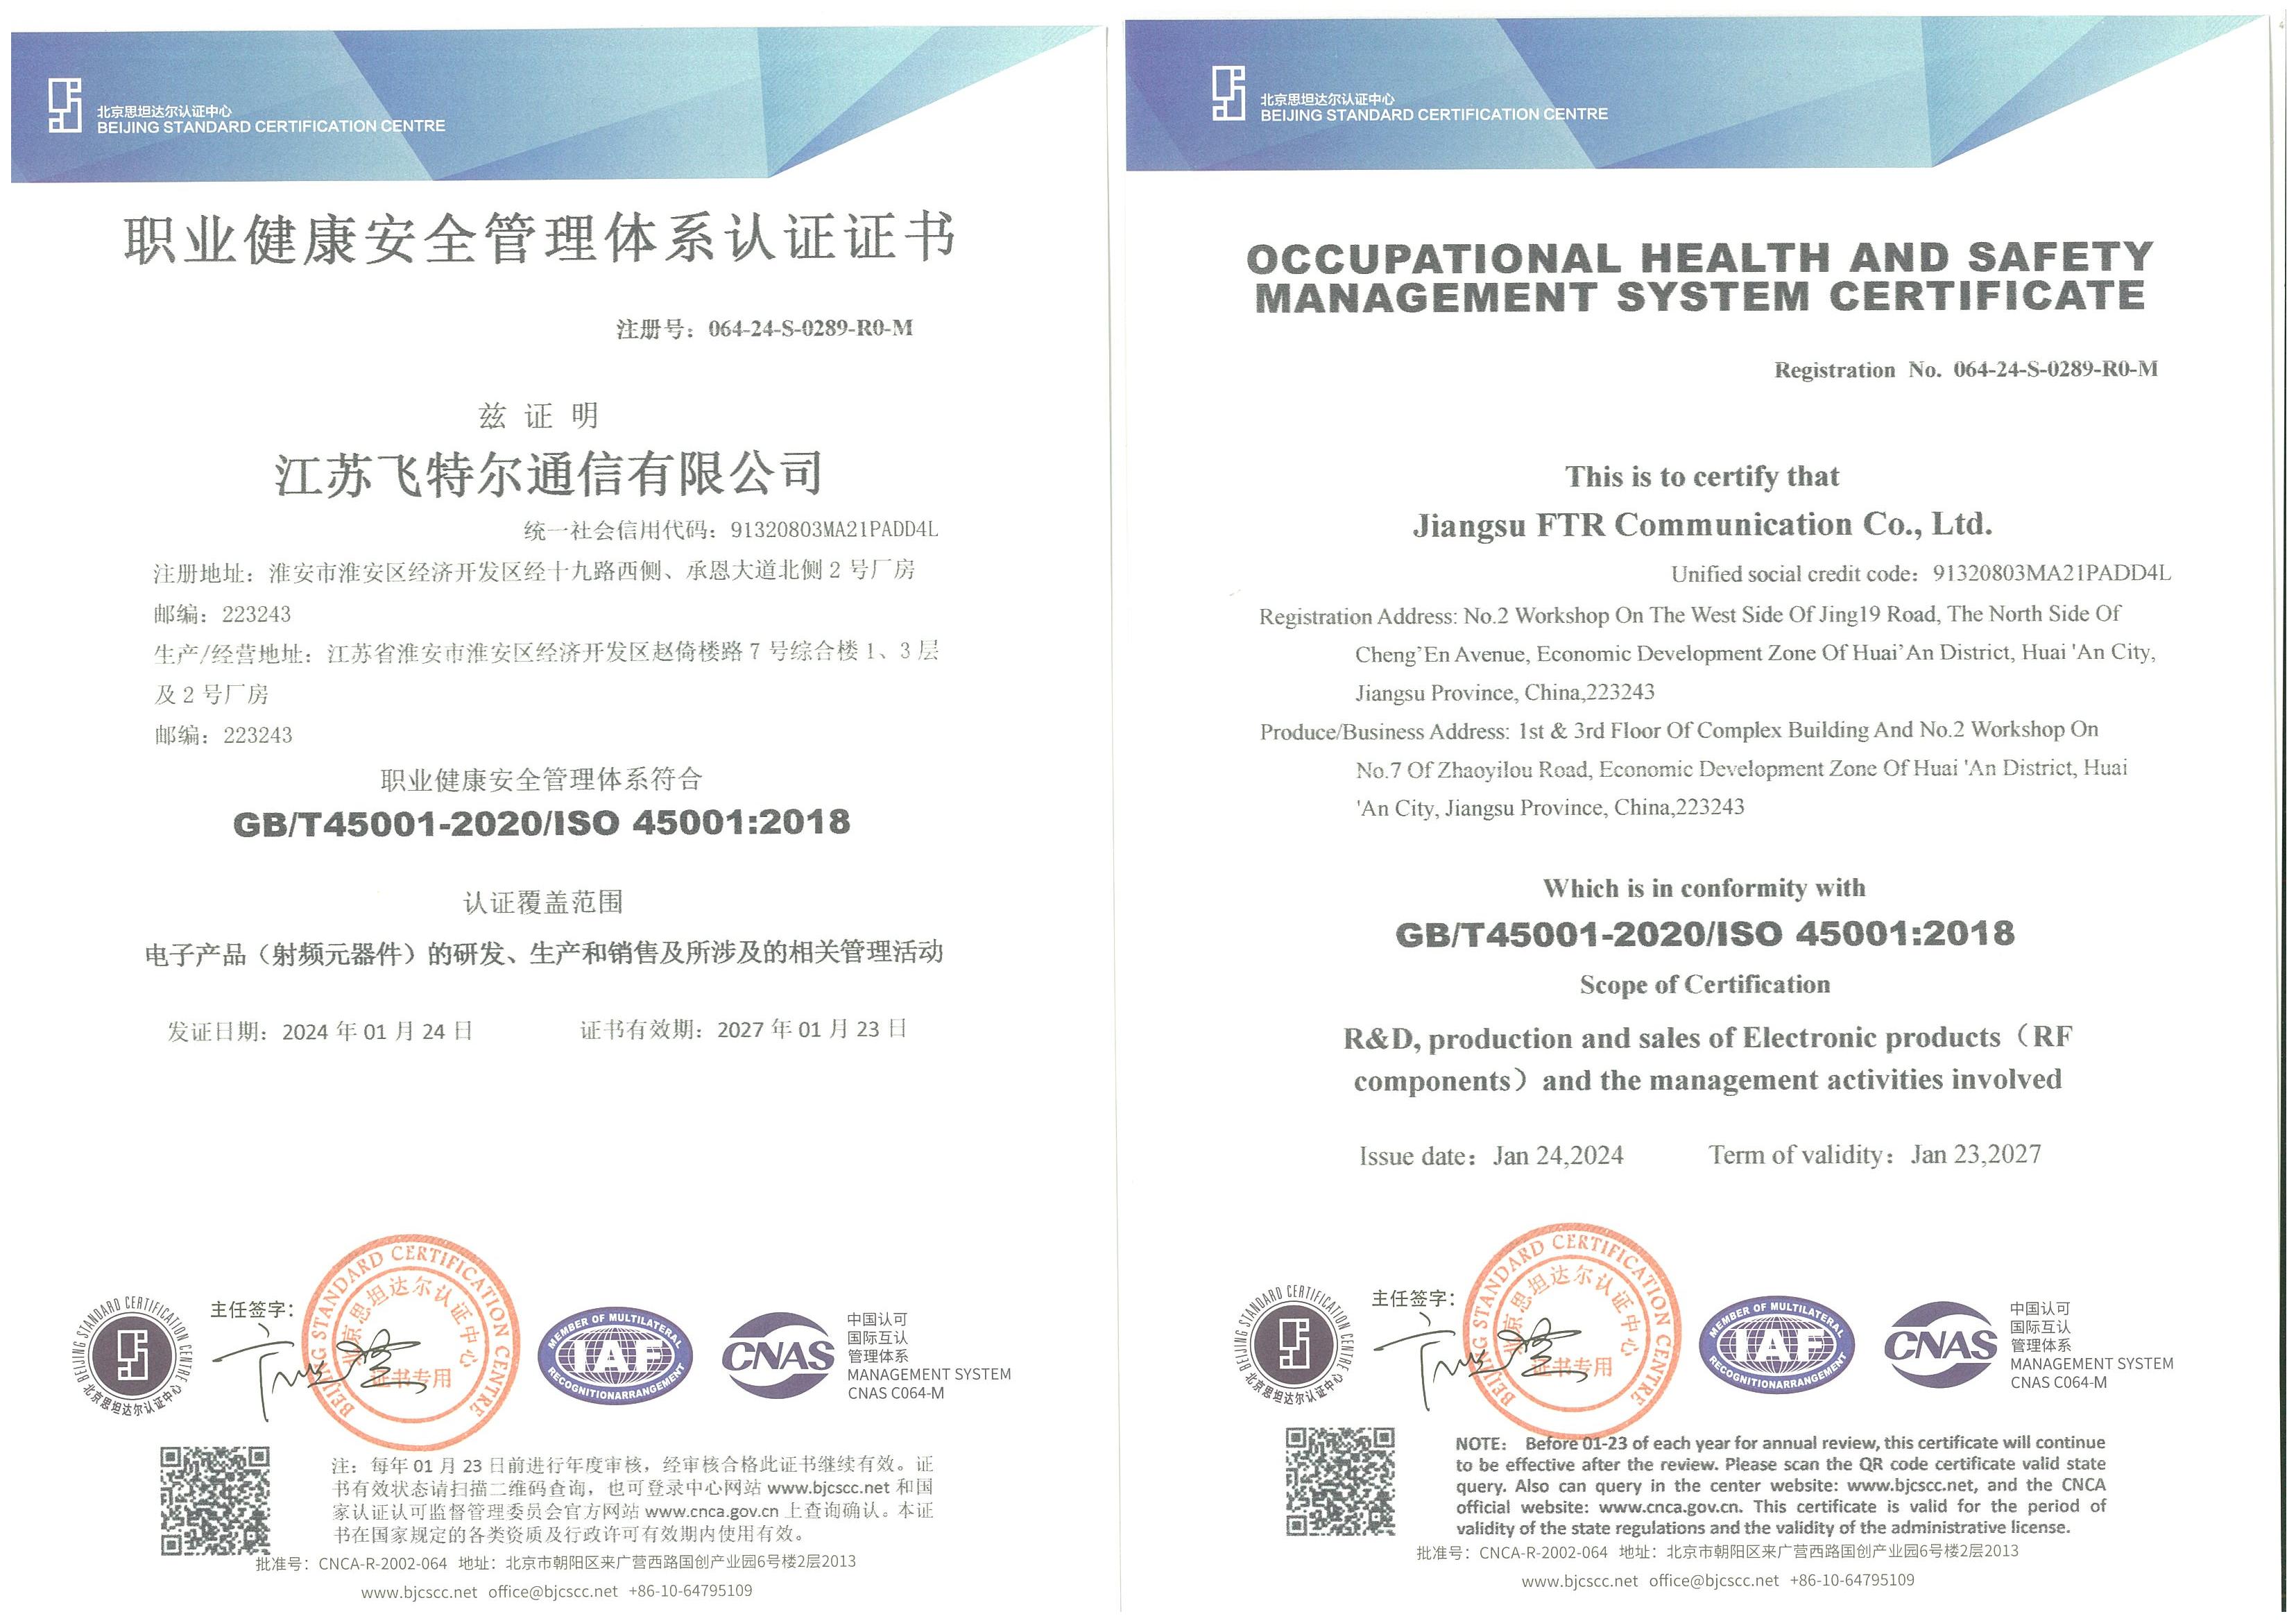 Our company has obtained the ISO45001 Occupational Health and Safety Management System Certification